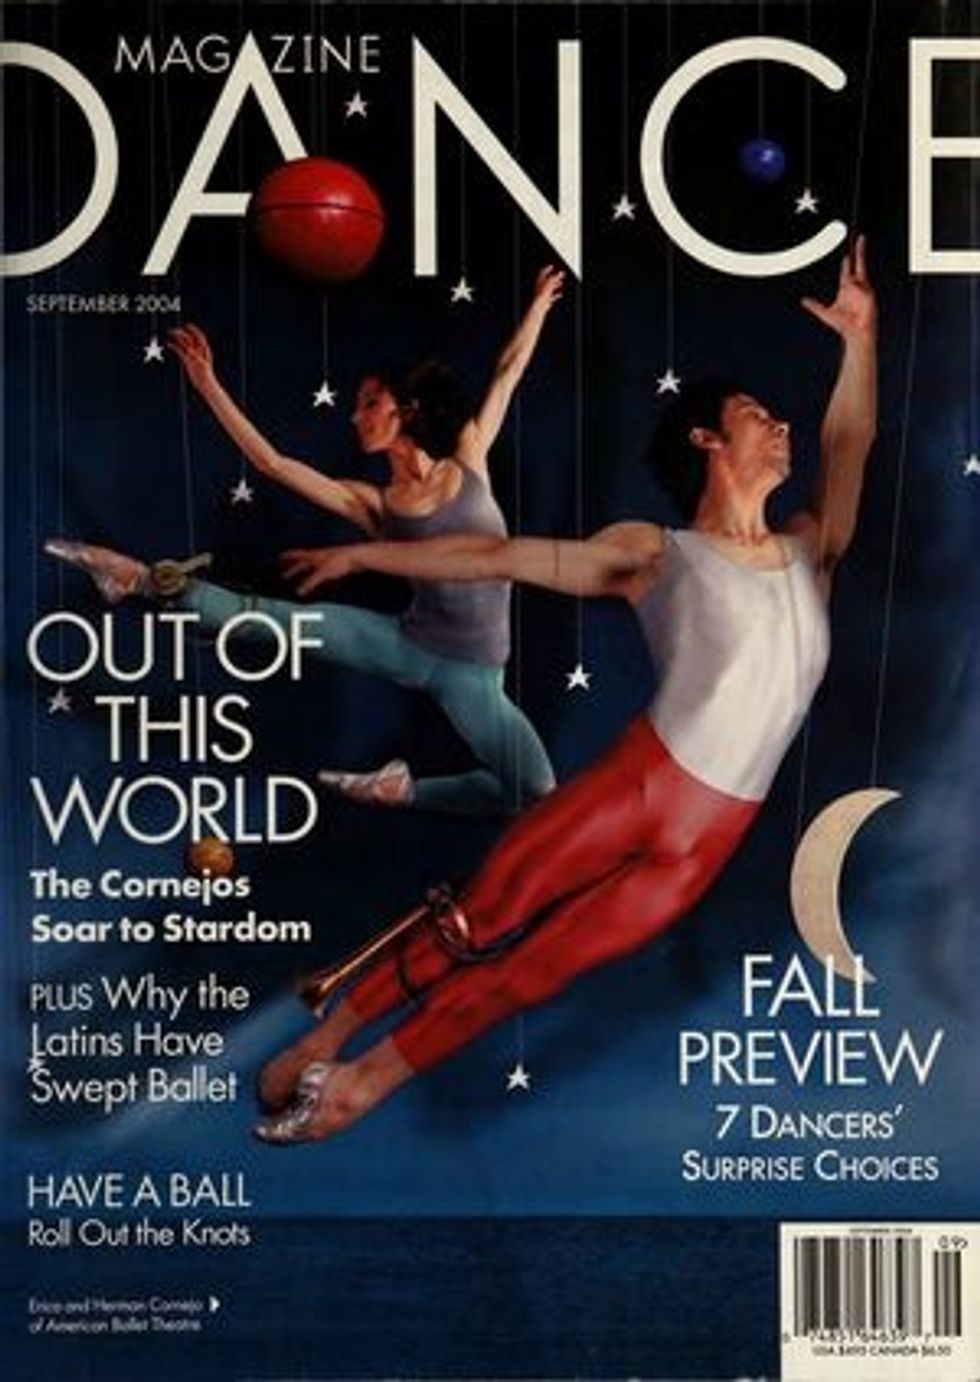 A Dance Magazine cover featuring the Cornejos leaping among illustrated planets and stars